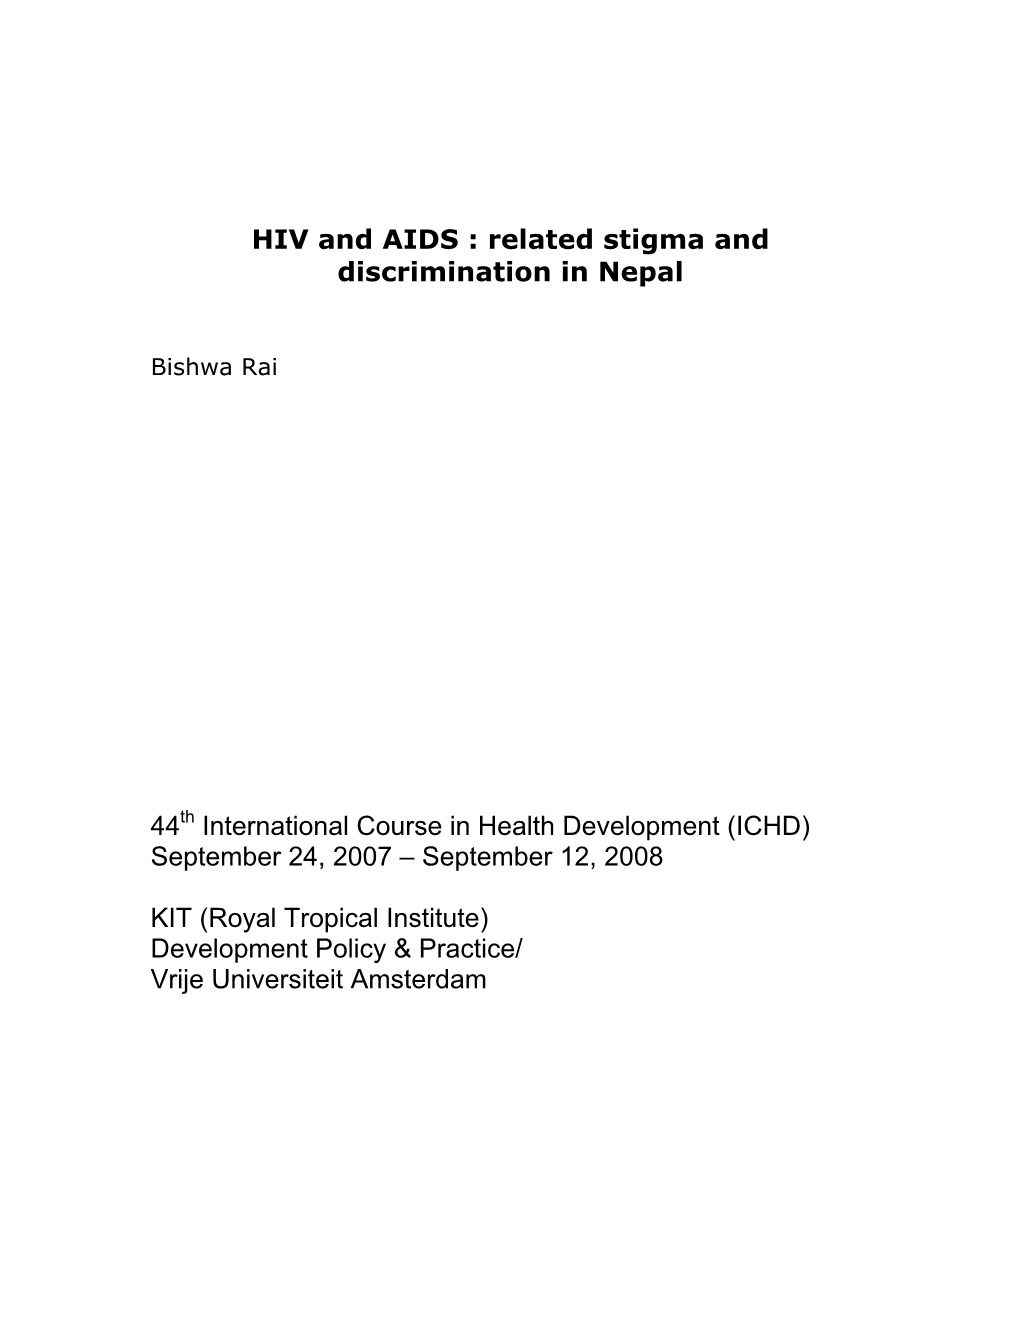 HIV and AIDS : Related Stigma and Discrimination in Nepal